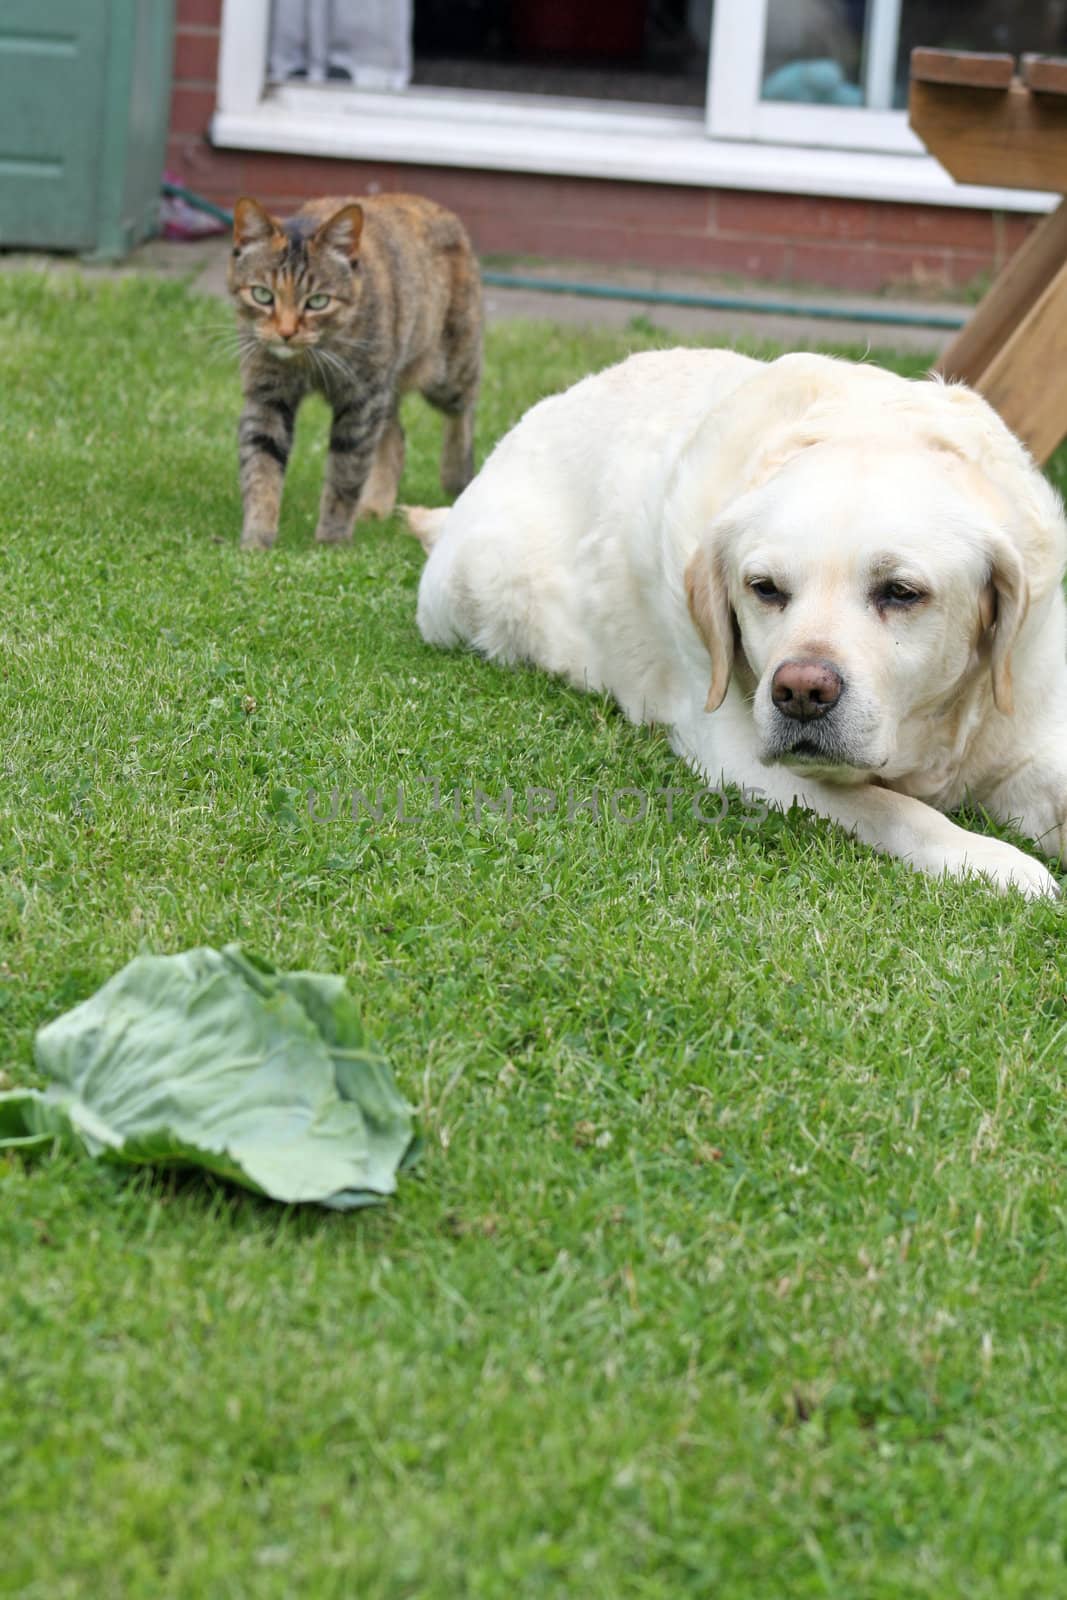 cat and dog in the garden by lizapixels